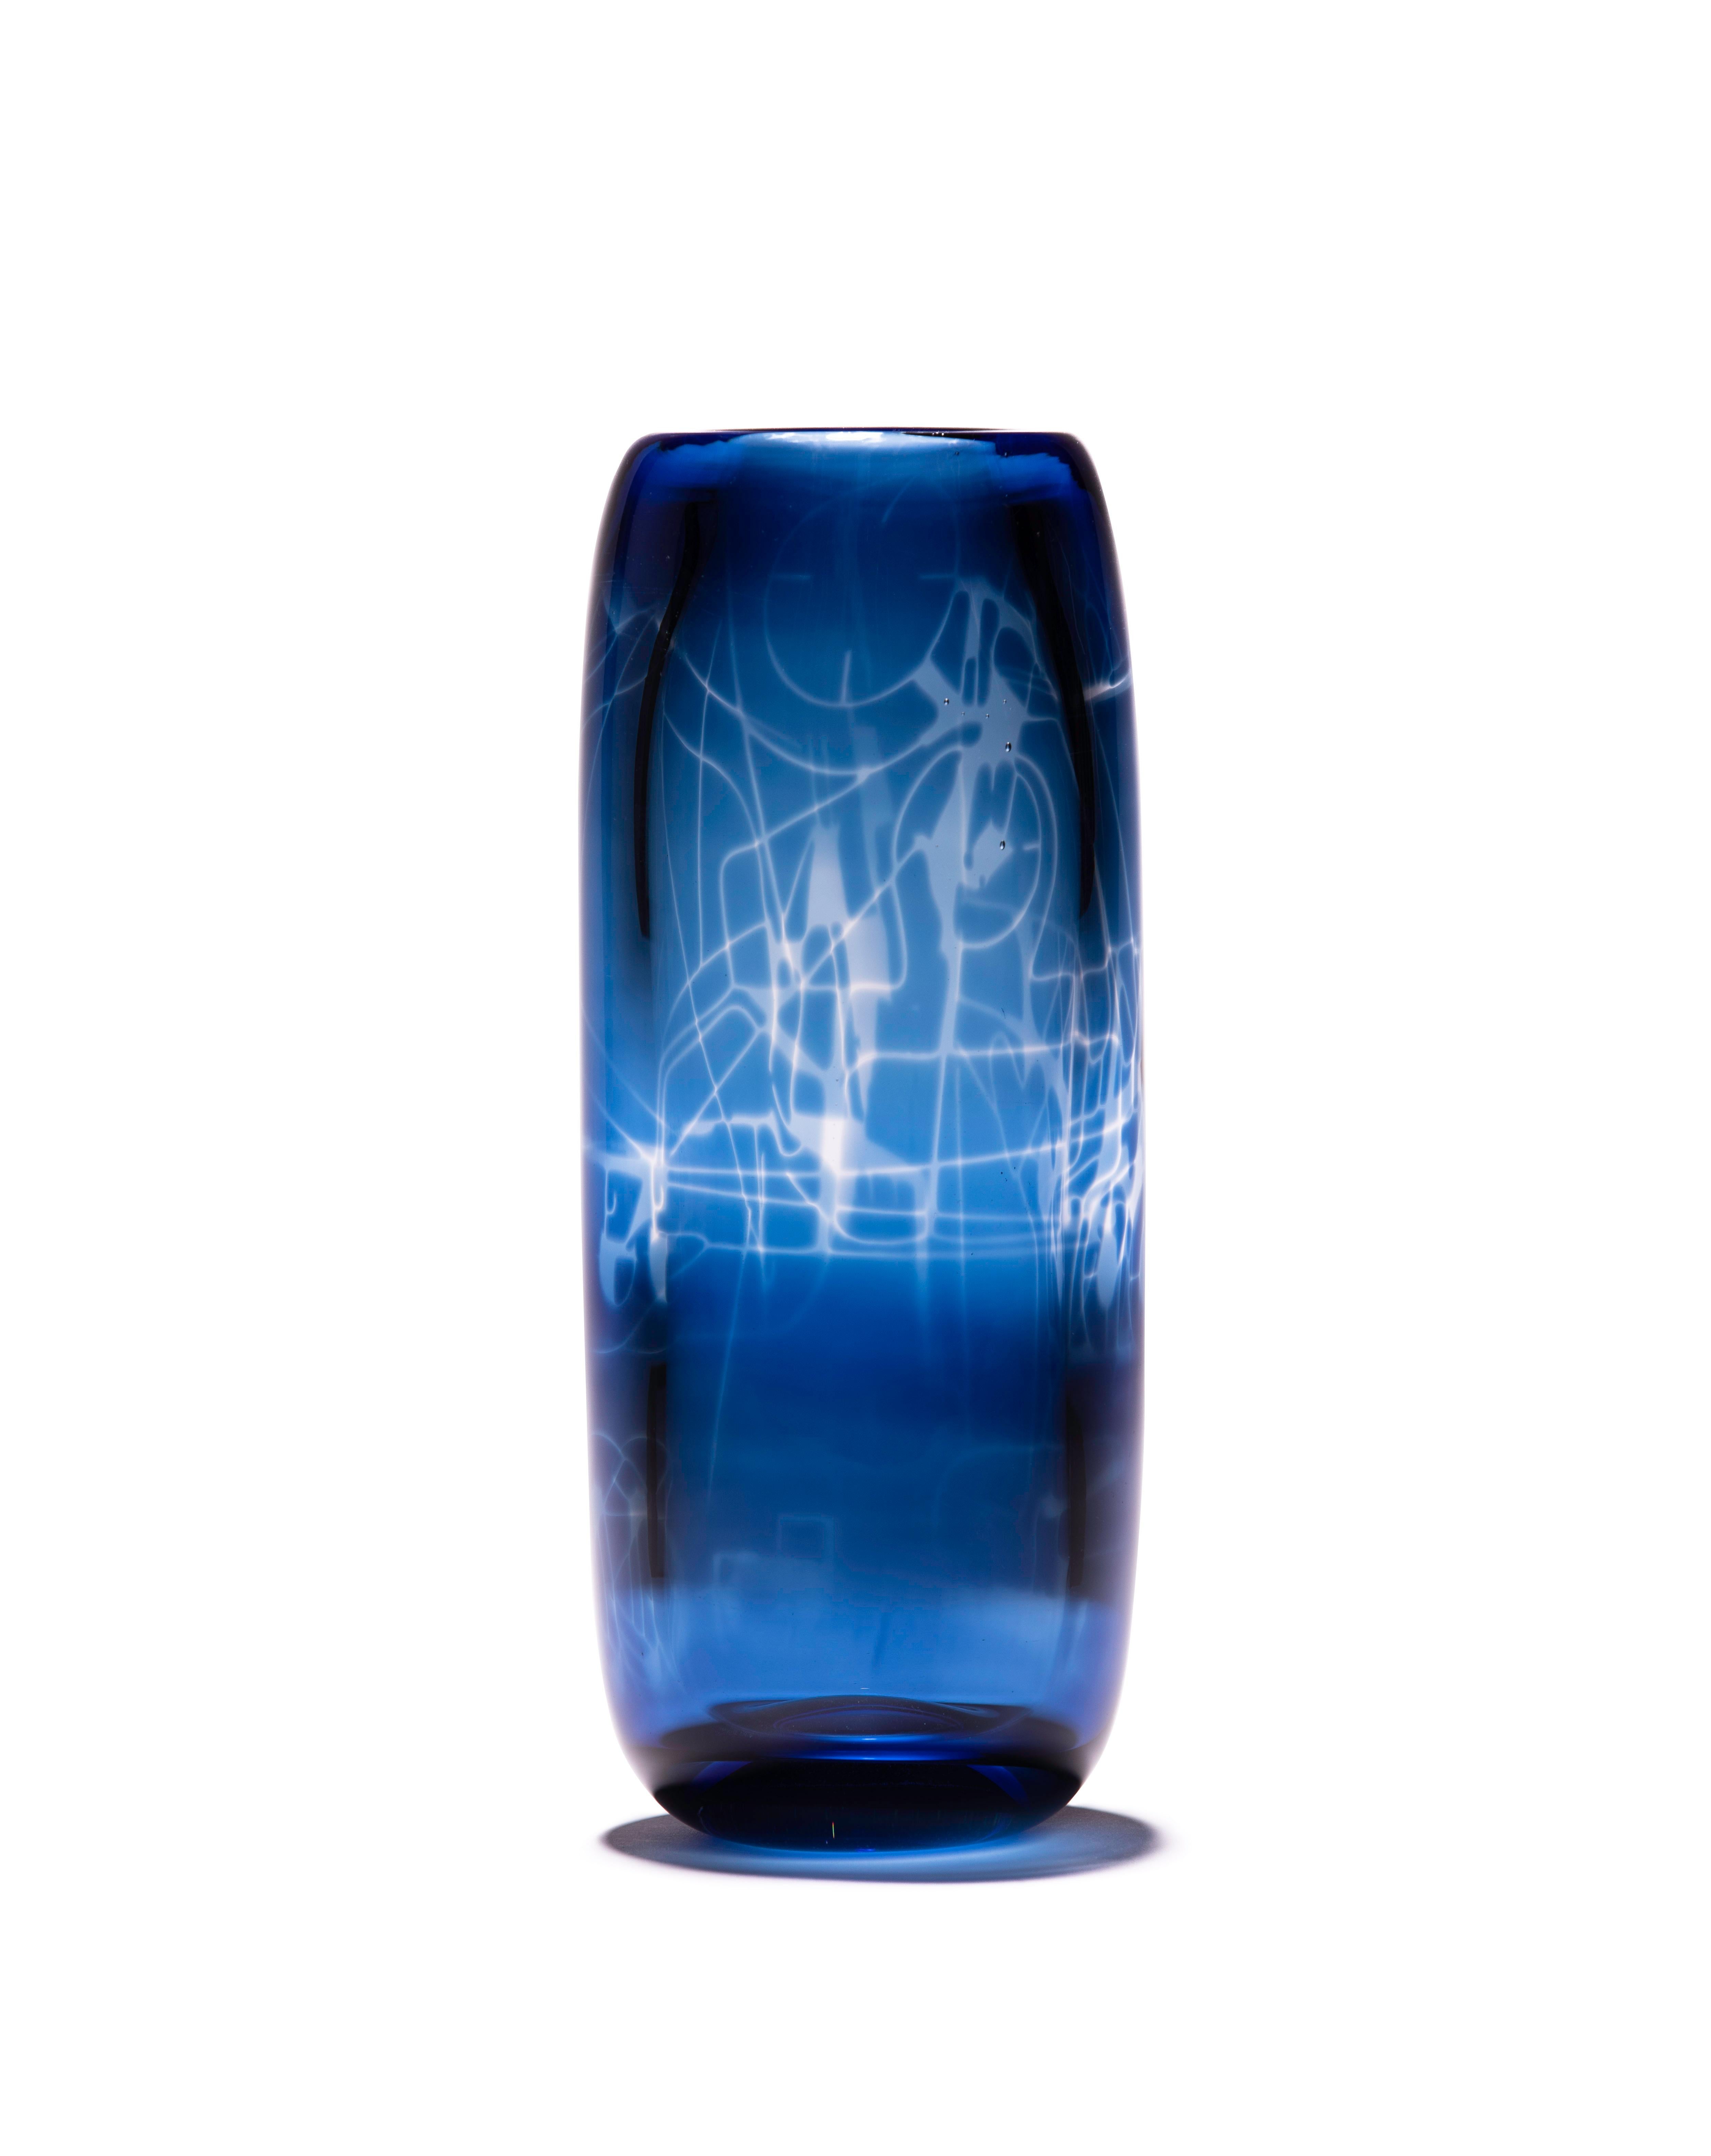 Unique Harvest Graal Blue and Black Glass Vase by Tiina Sarapu 8